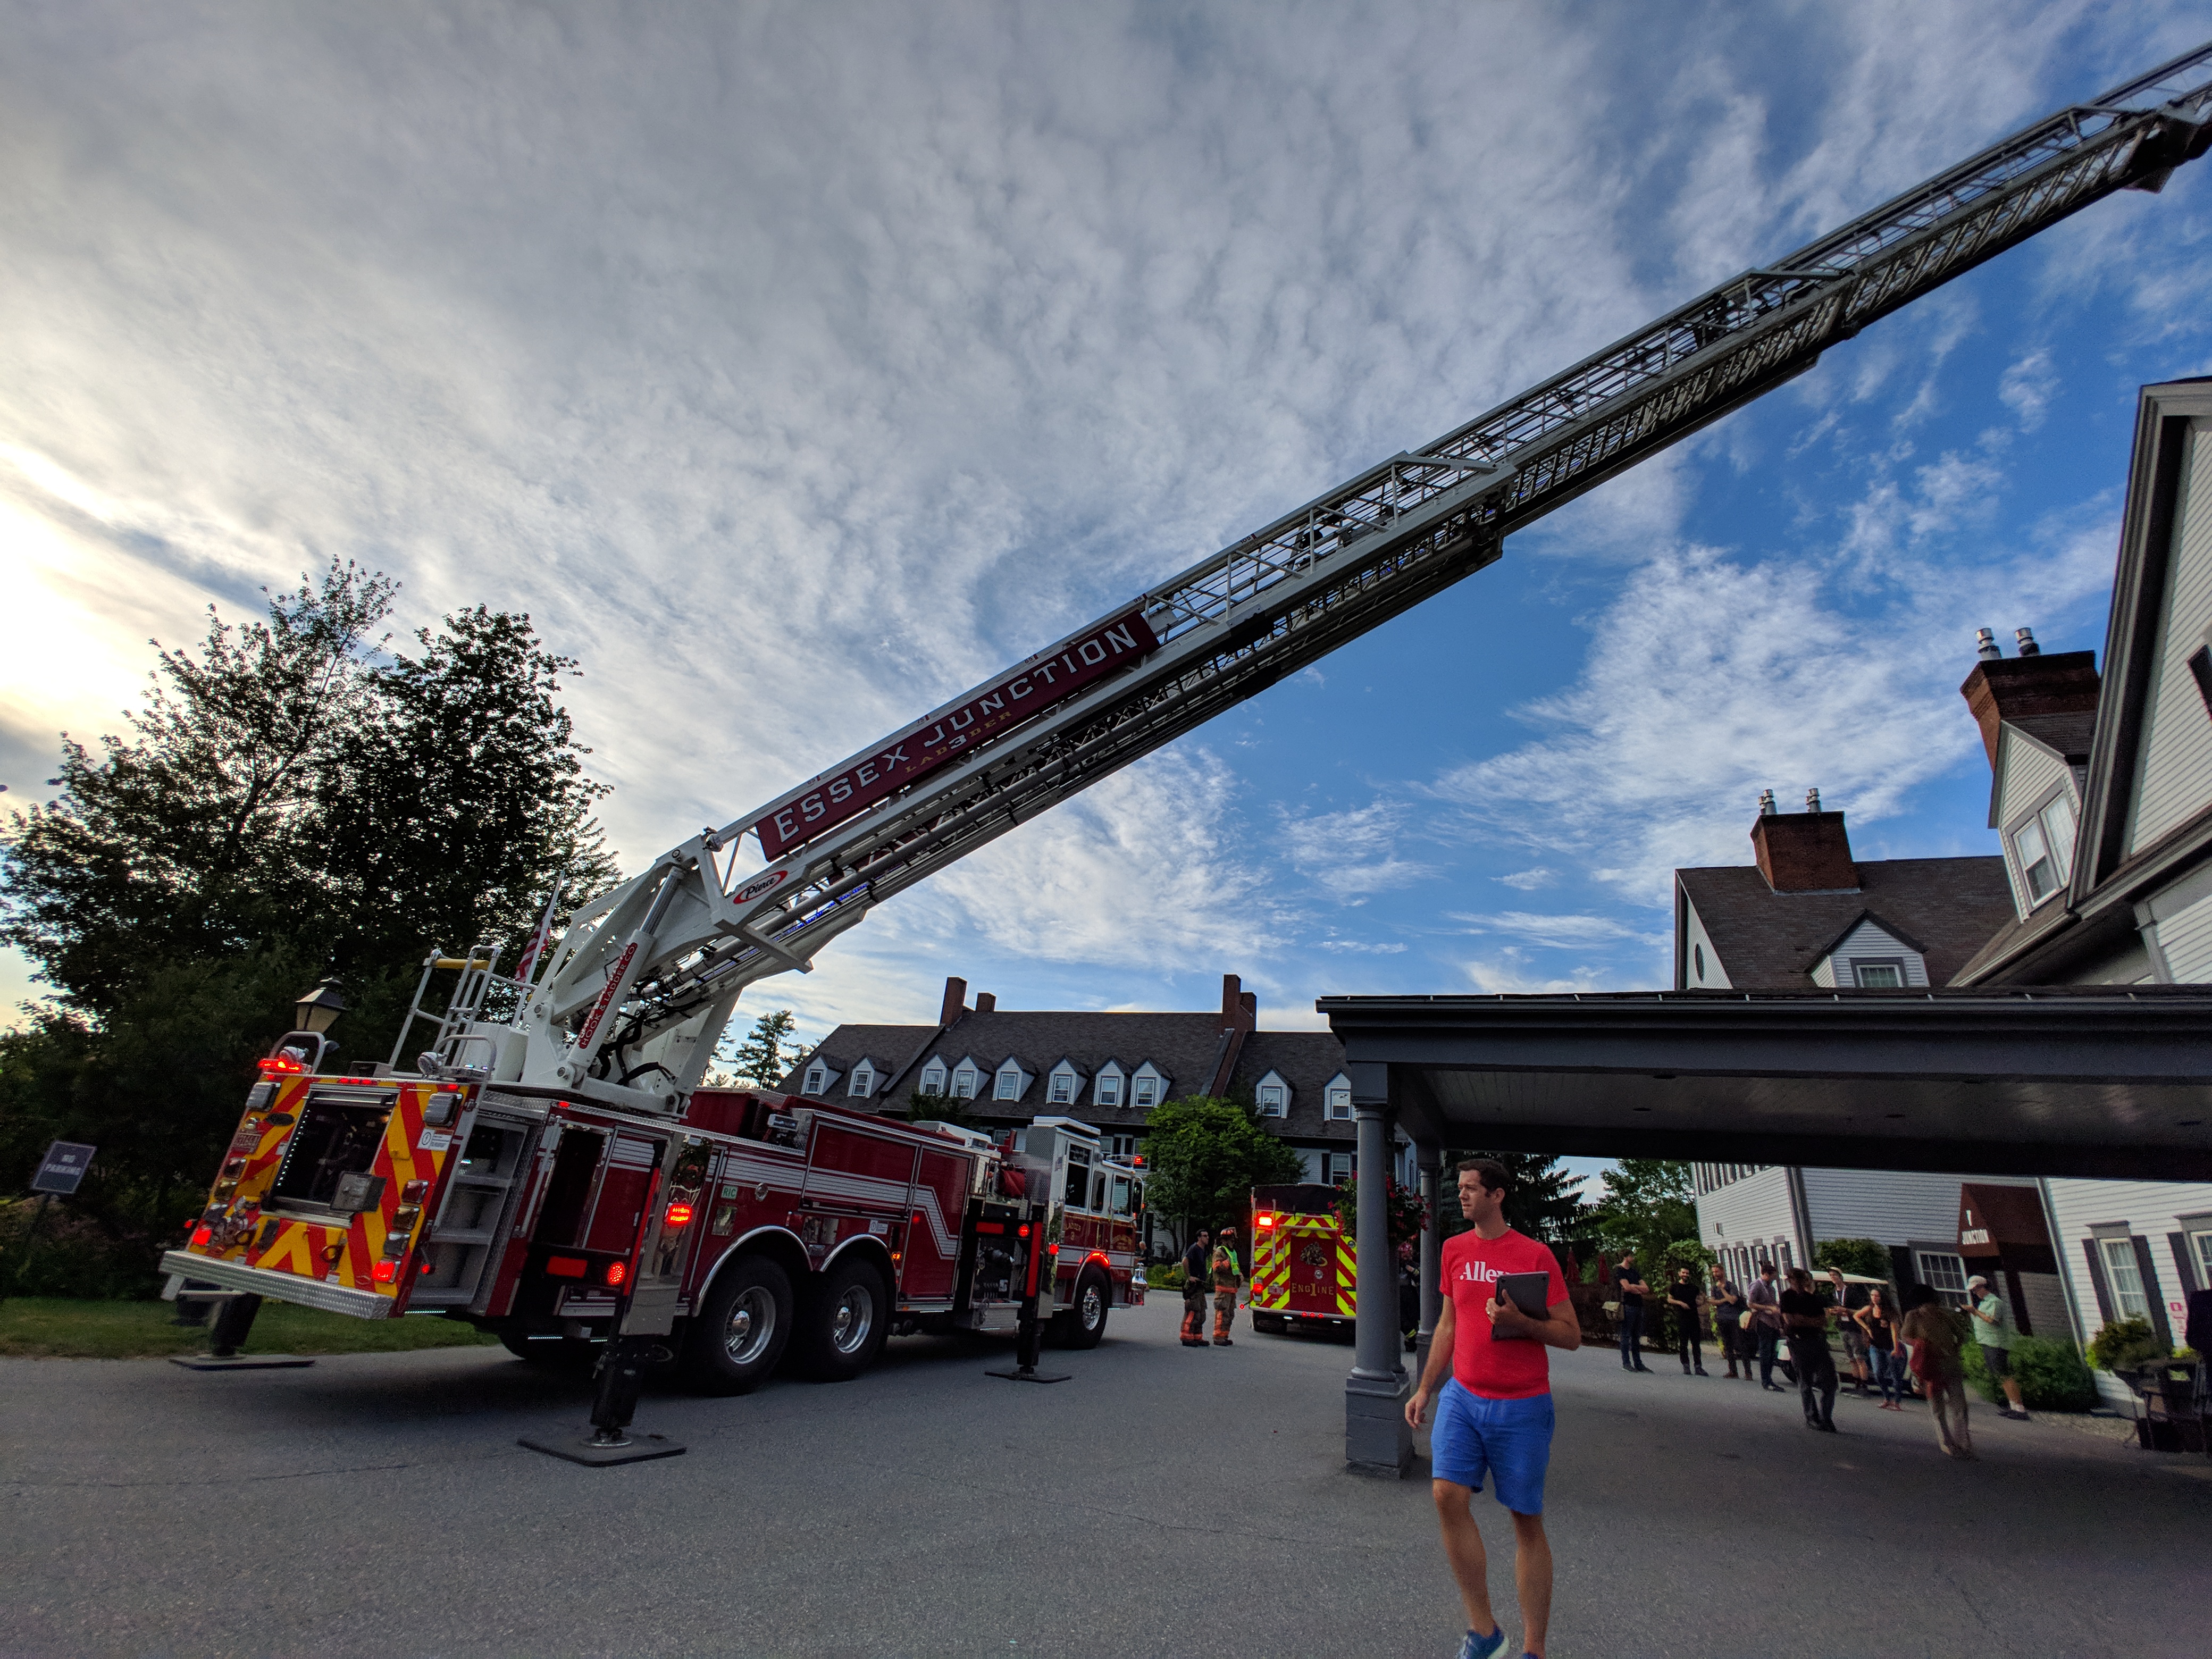 A fire truck with a long ladder fully extended to reach the top of the building next door while a White man with a red Alley shirt and blue shorts walks in front